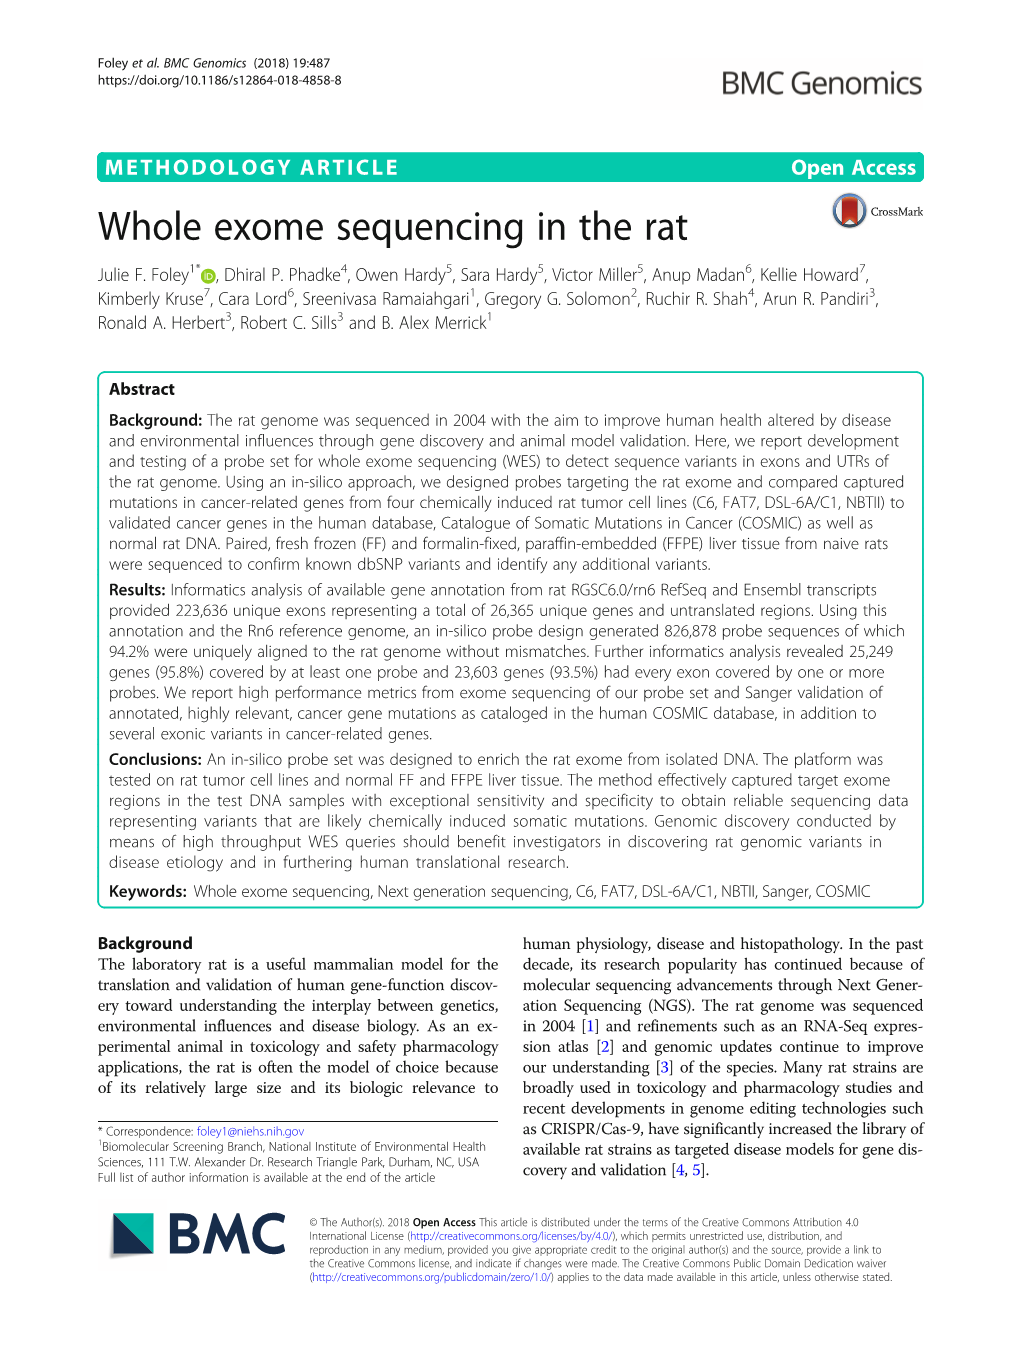 Whole Exome Sequencing in the Rat Julie F